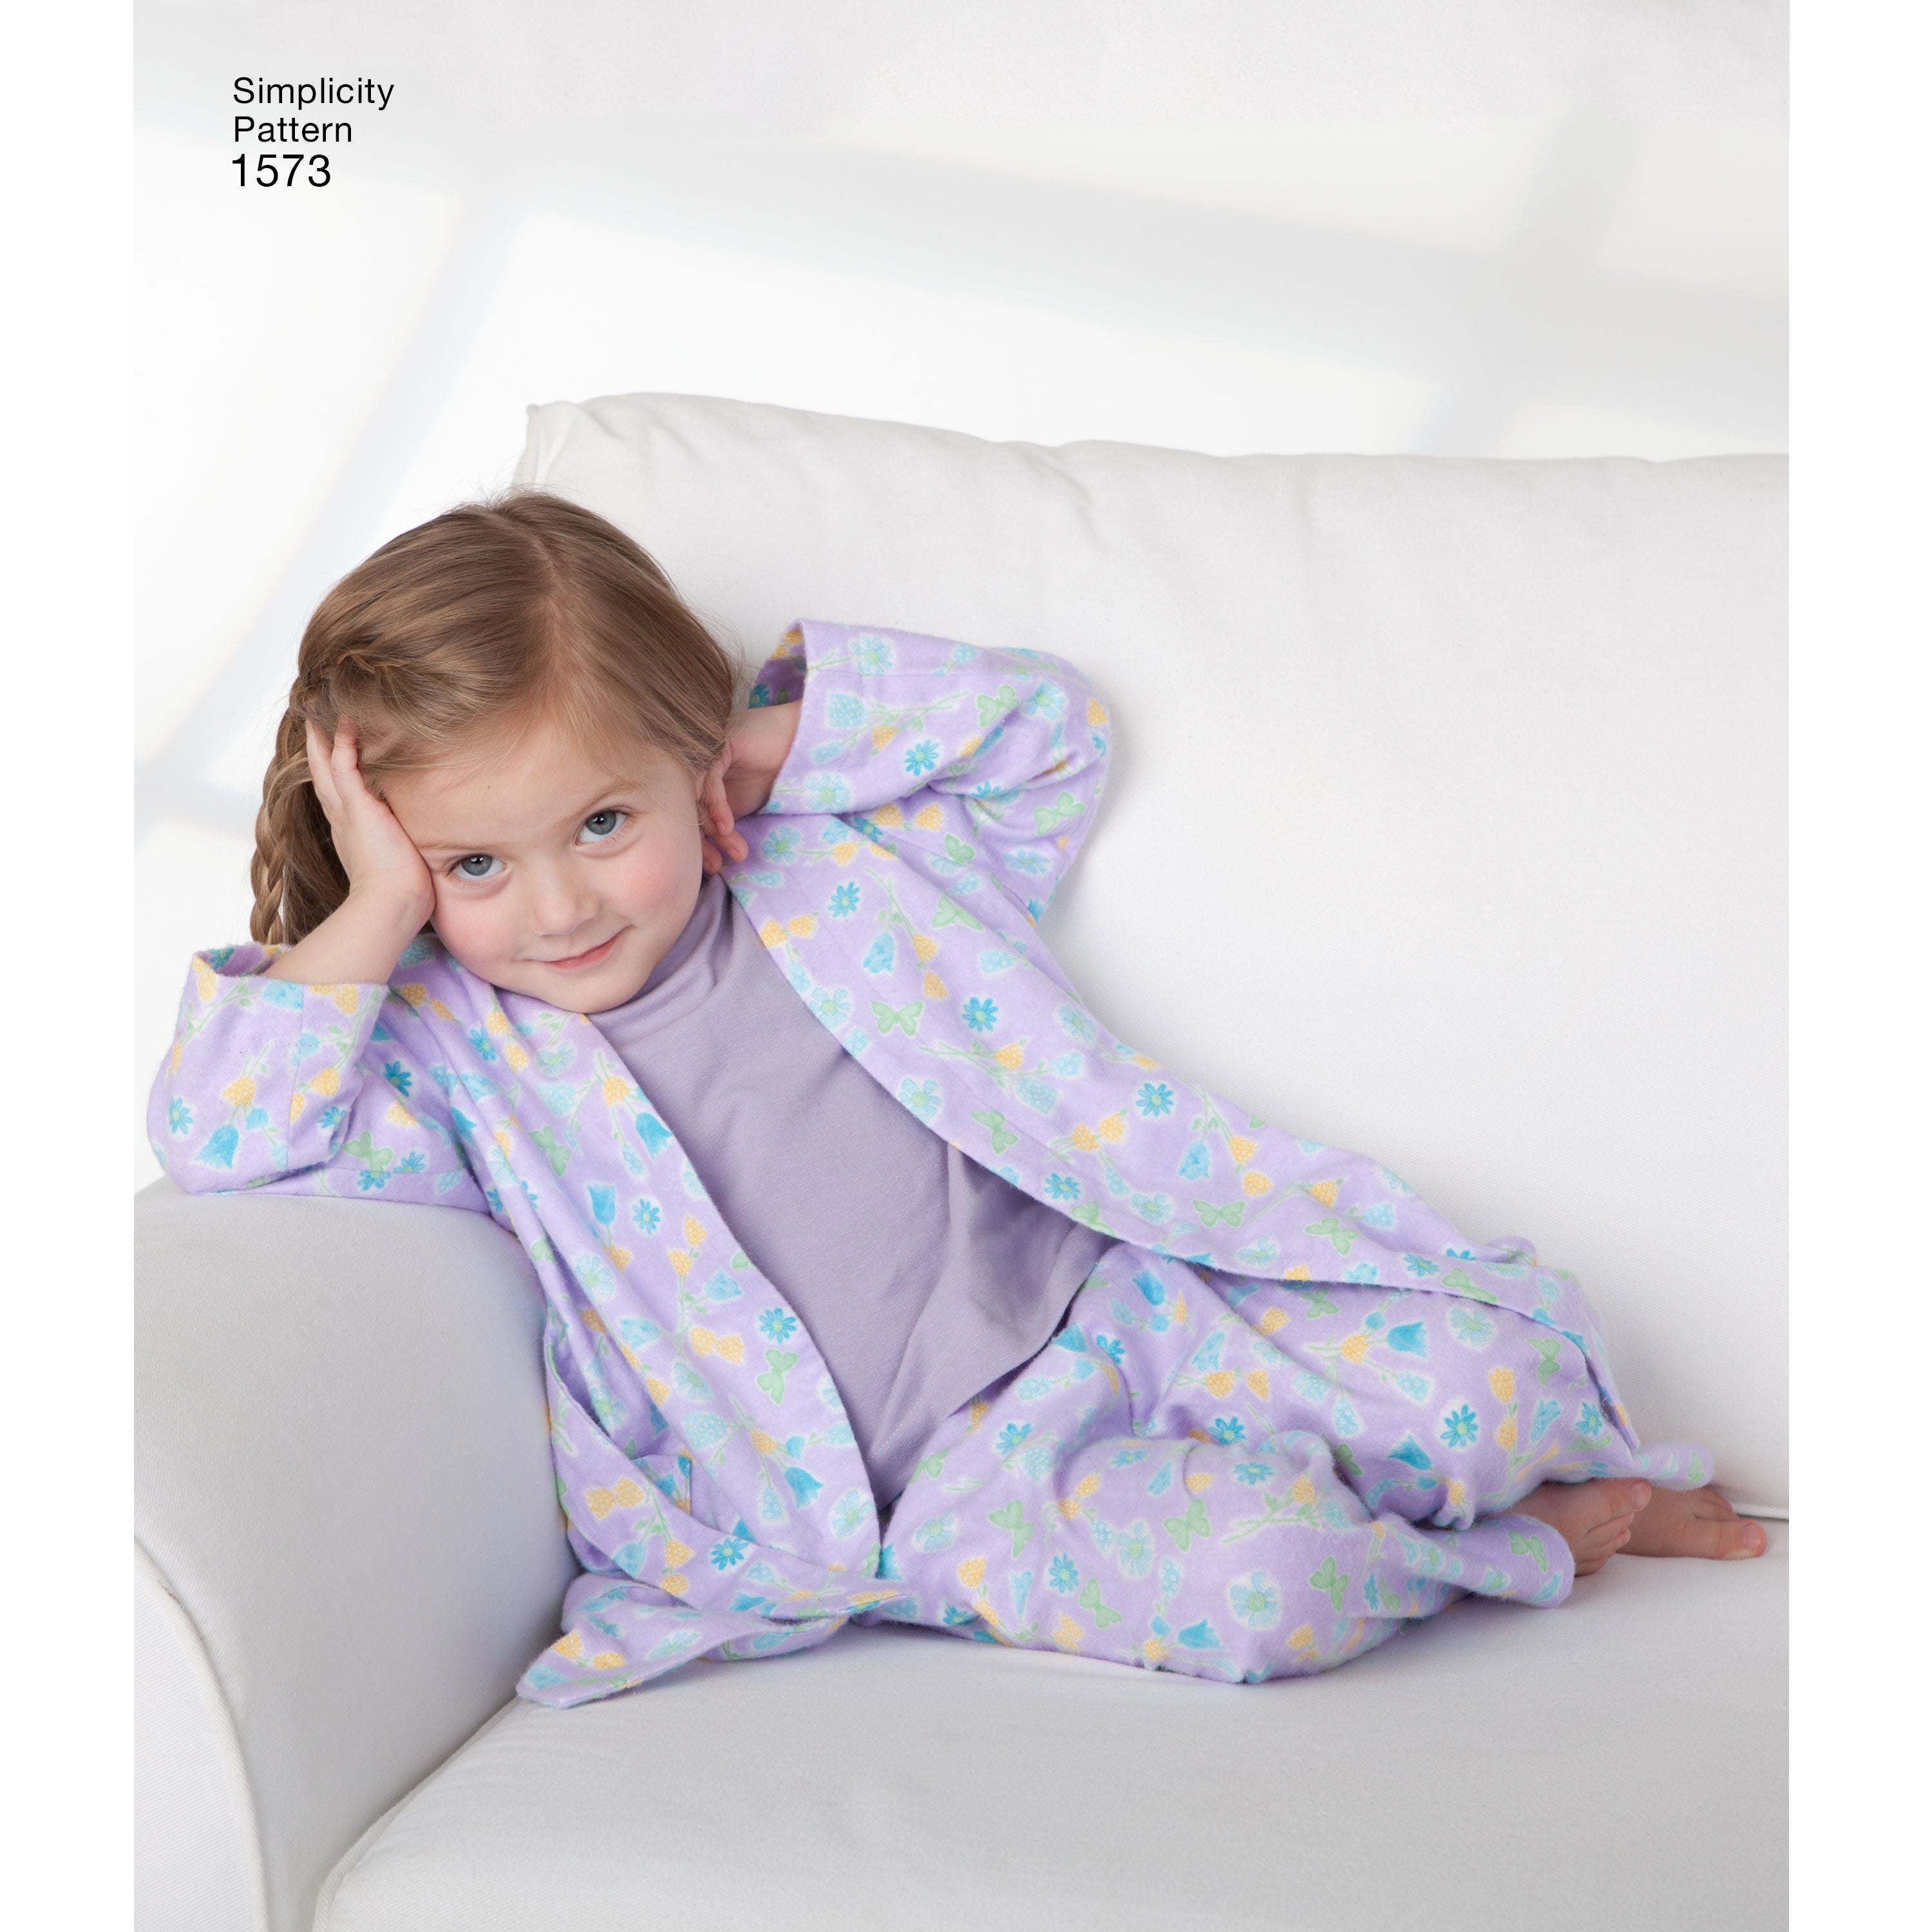 Simplicity Pattern 1573 Toddlers' and Child's robe, pants from Jaycotts Sewing Supplies